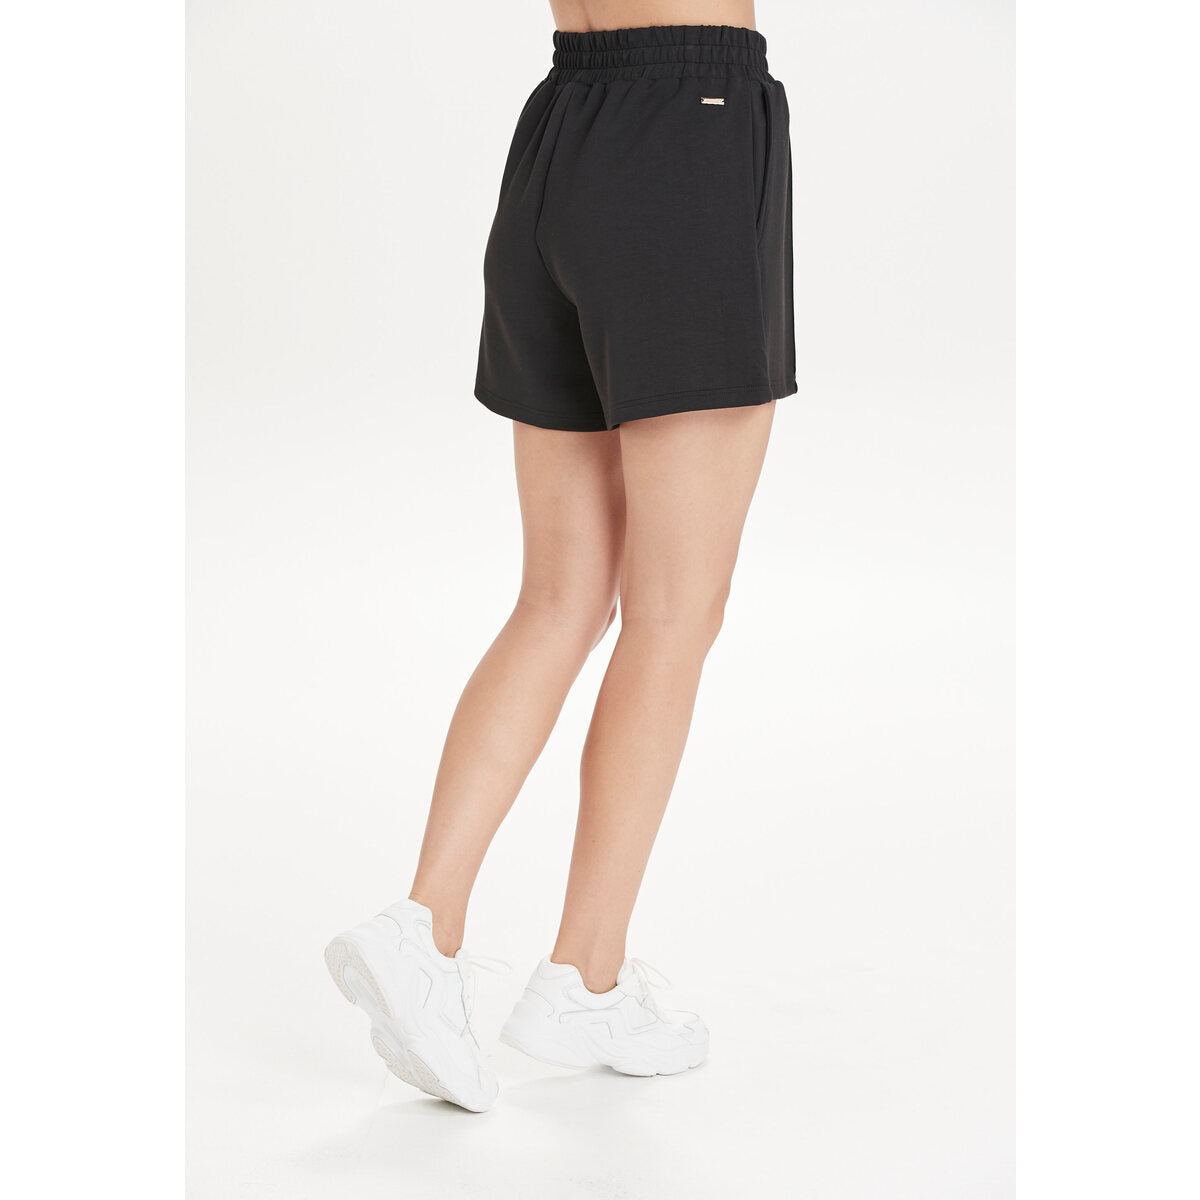 Athlecia Jacey Womenswear High Waisted Lounge Shorts - Black 3 Shaws Department Stores